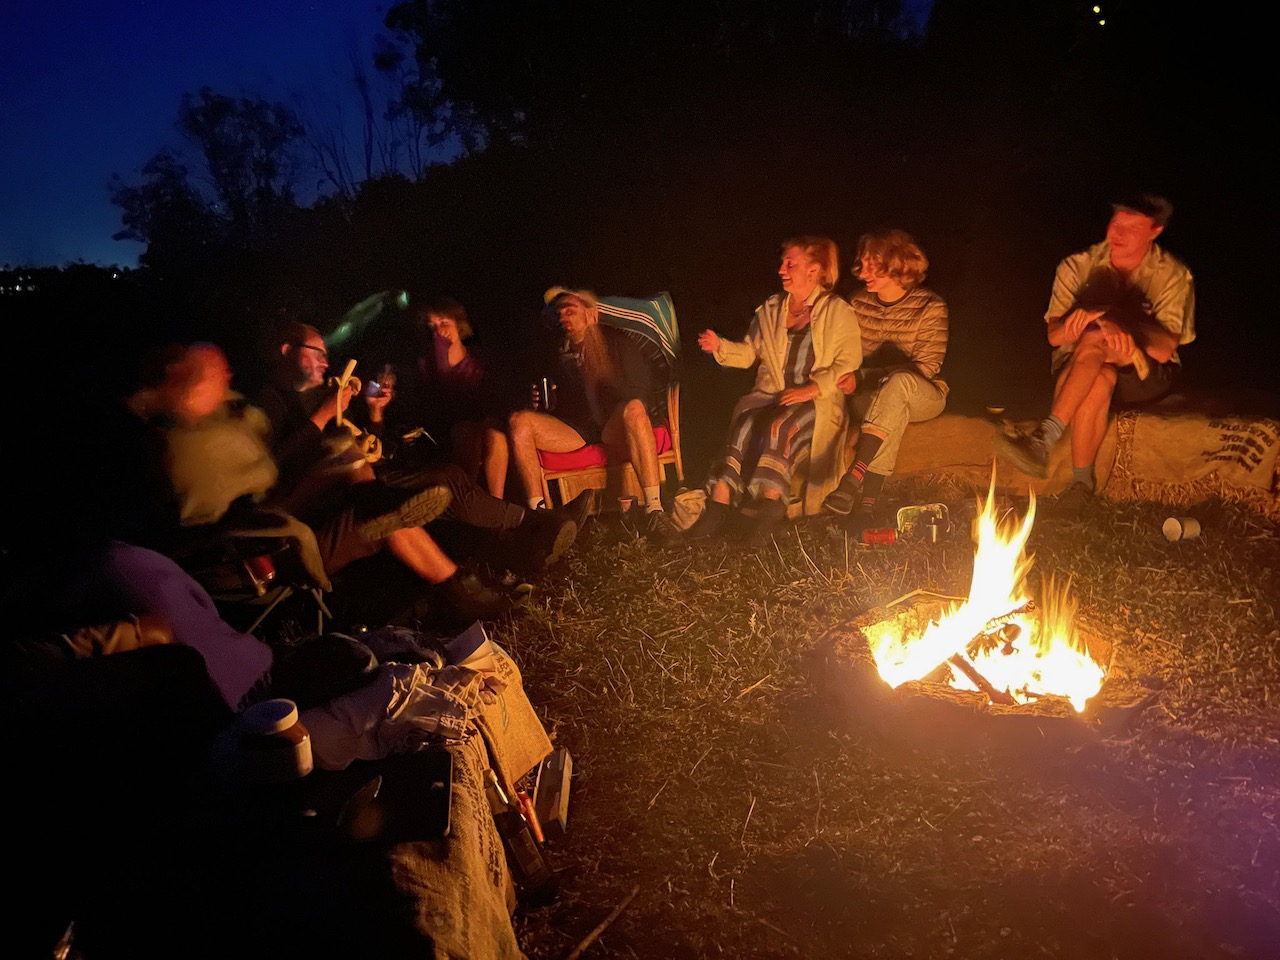 A group of people laughing by a campfire. It's a bit blurry.